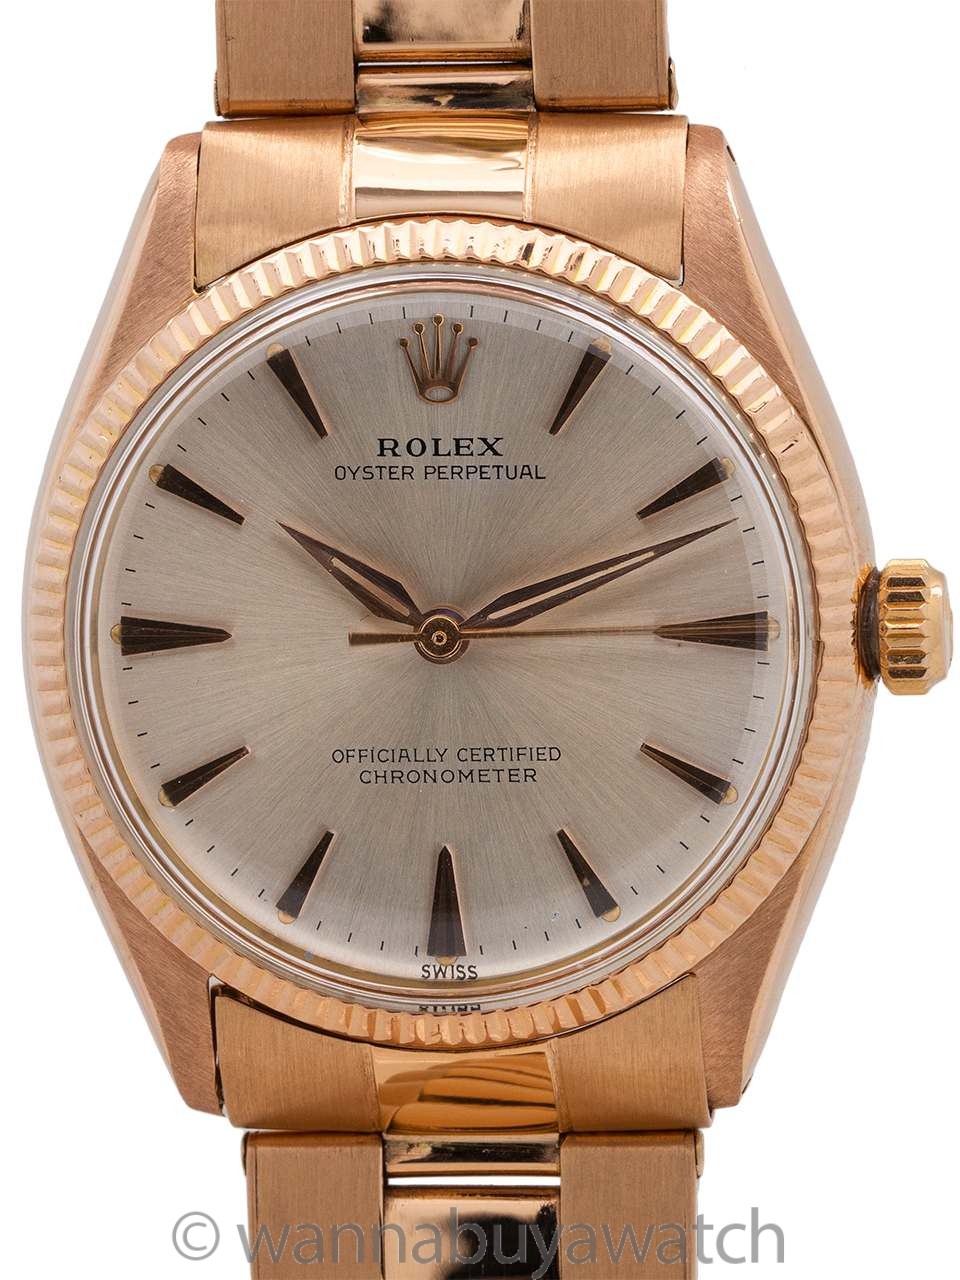 Rolex 18K PG Oyster Perpetual ref 6567 